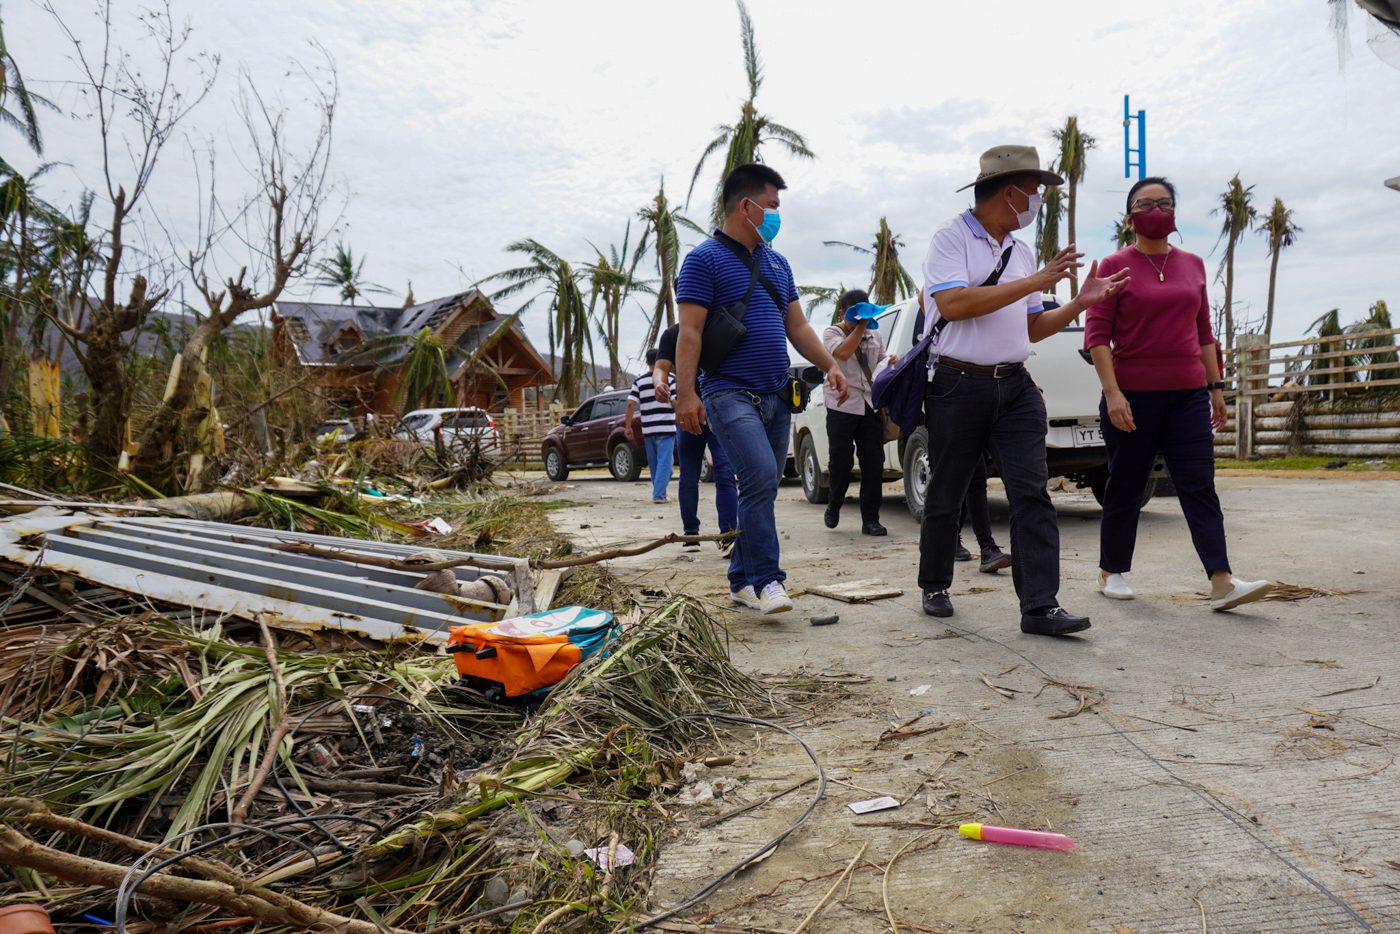 Food, housing materials ‘most needed’ in Catanduanes – Robredo